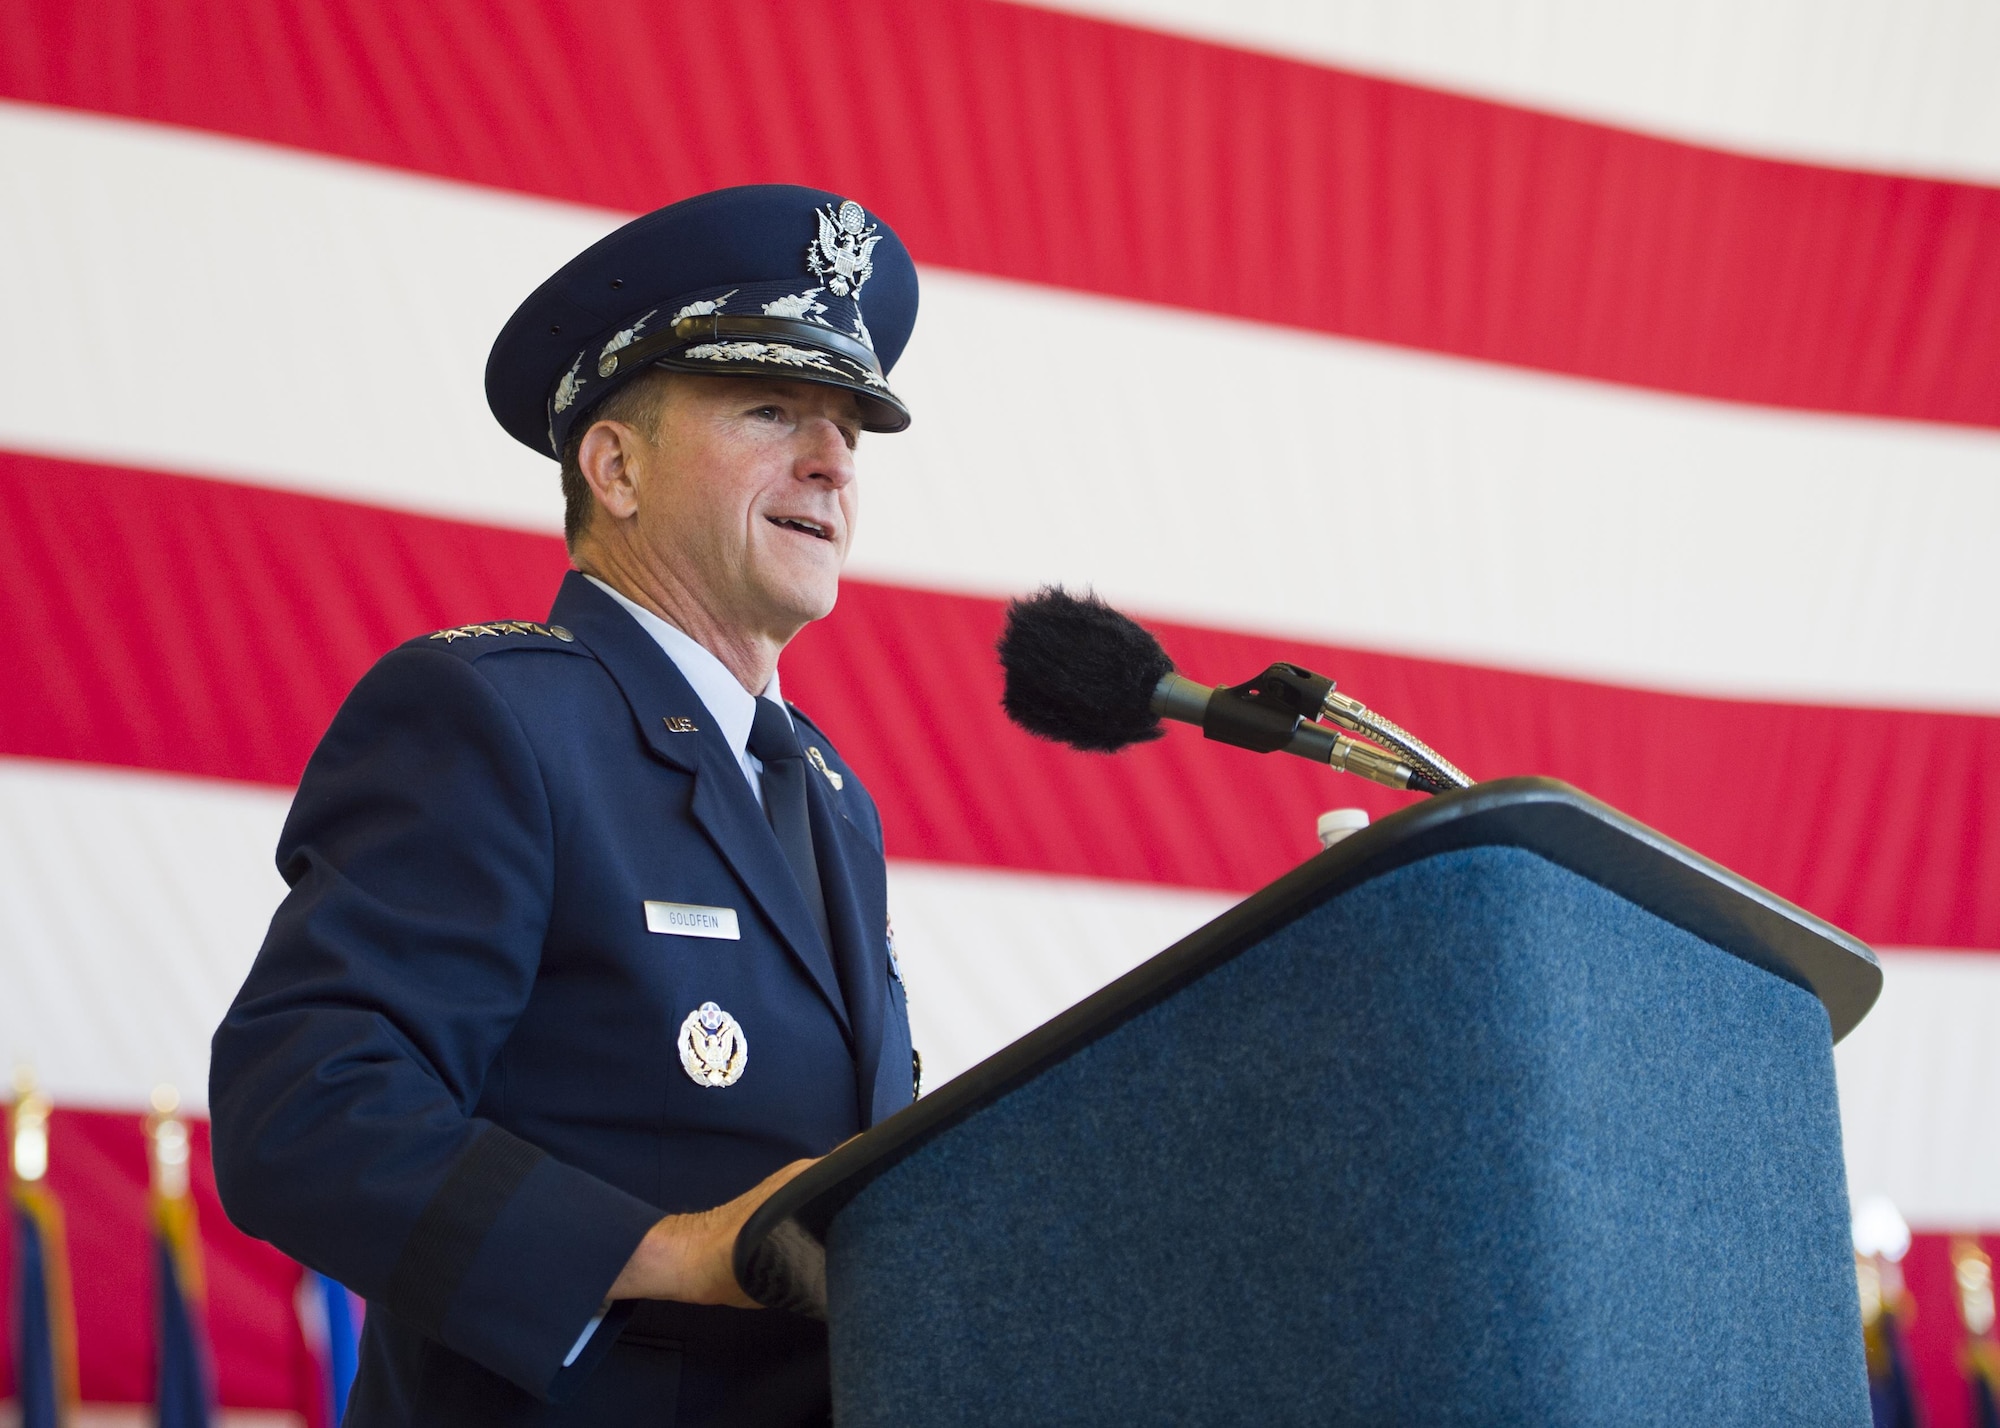 Gen. David L. Goldfein, Chief of Staff of the U.S. Air Force, speaks to the assembled Air Commandos and guests during the Air Force Special Operations Command change of command ceremony July 19, 2016, at Hurlburt Field, Fla. Goldfein officiated as Lt. Gen. Brad Webb took command of AFSOC.  Webb is the 11th AFSOC commander, and follows Lt. Gen. Brad Heithold, who is transferring to Washington D.C. to serve as the principal deputy director of cost assessment and program evaluation in the Office of the Secretary of Defense. (U.S. Air Force photo by Staff Sgt. Melanie Holochwost)